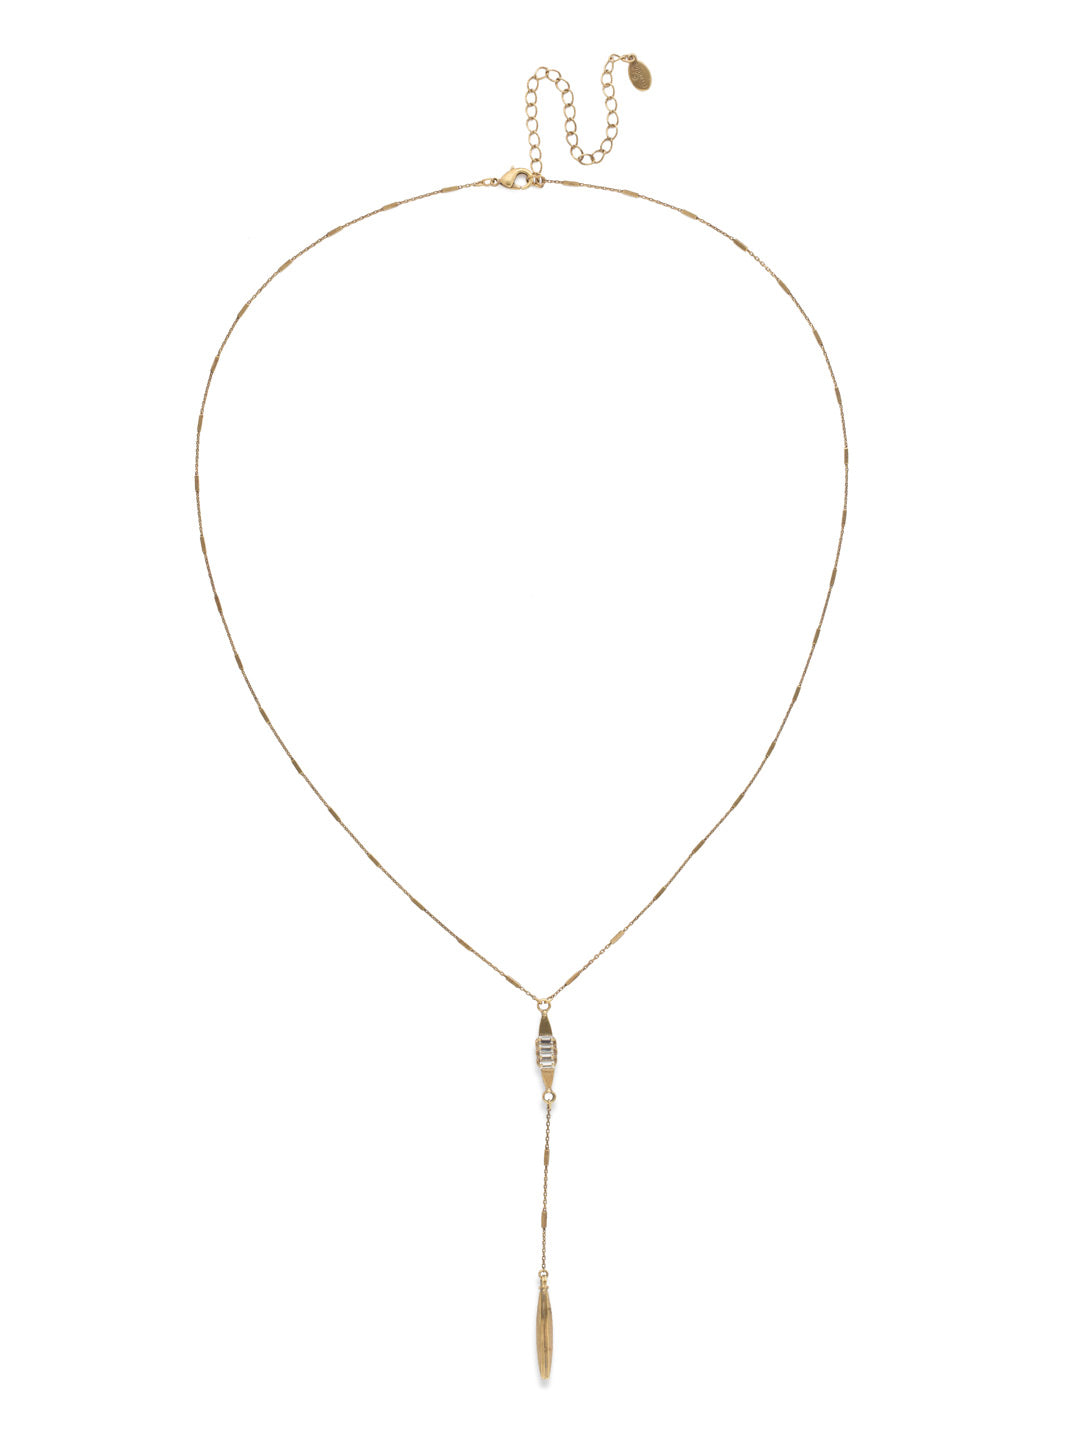 Point It Out Necklace - NDM28AGCRY - <p>No need to point out that this is a fantastic necklace - it goes without saying! A delicate Y necklace, this lariat features a central metal finding with beautifully set baguettes and a slim metal point beneath. From Sorrelli's Crystal collection in our Antique Gold-tone finish.</p>